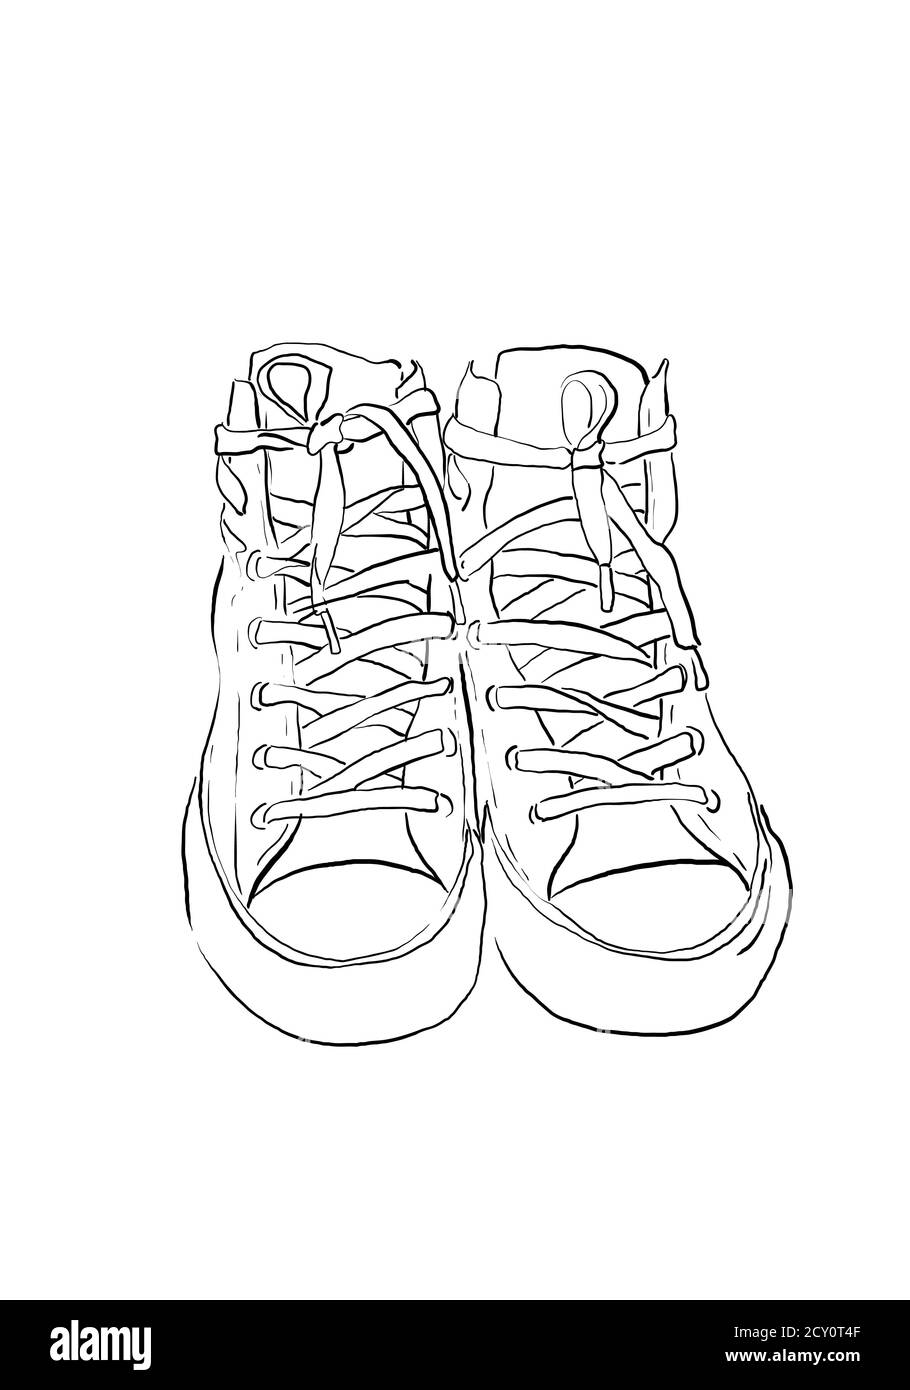 One line illustration of sneakers. Sports shoes in a line drawing style for sport & branding design. Stock Photo